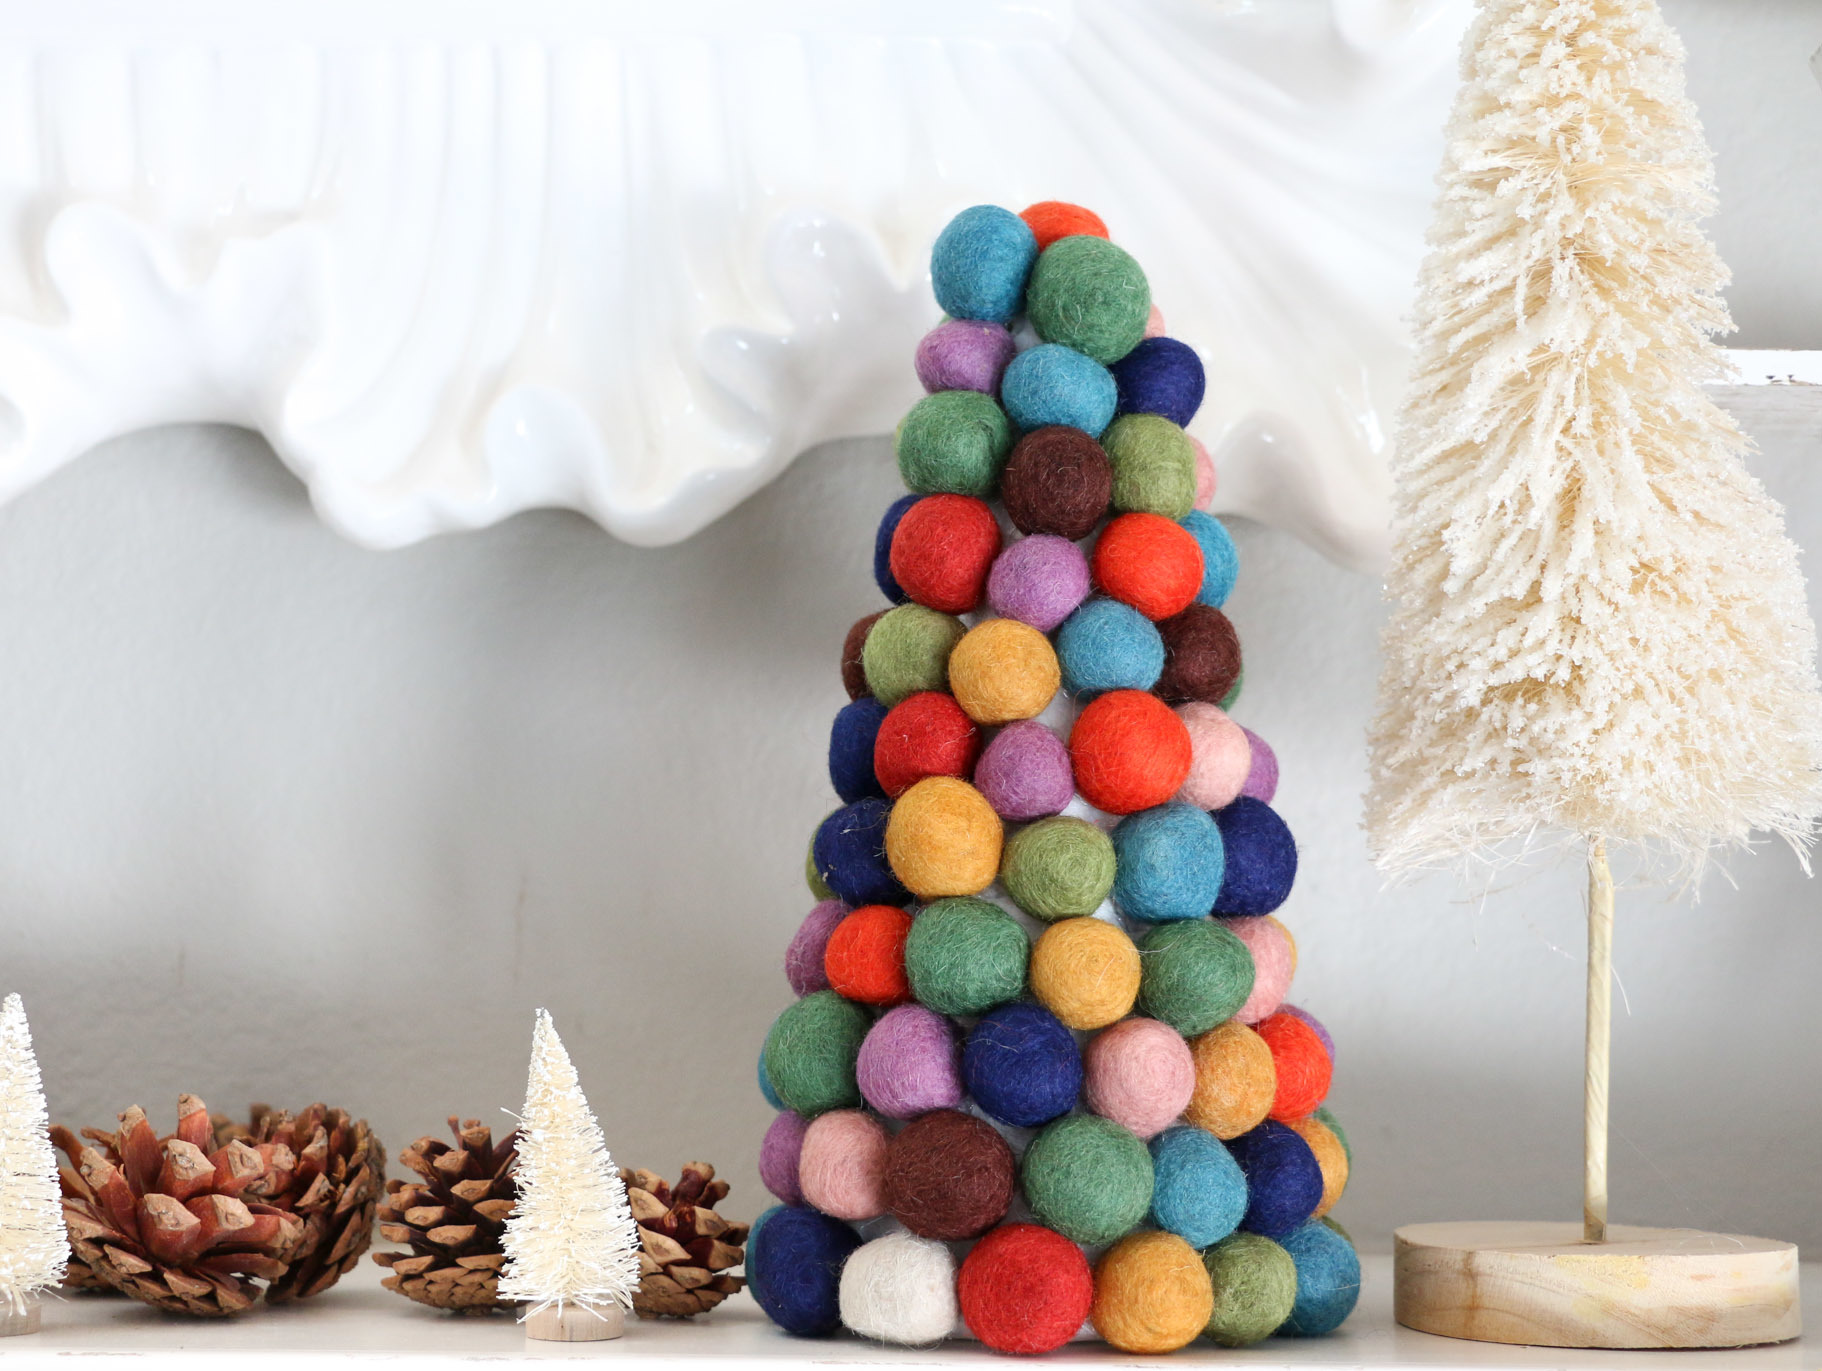 Felt Balls Projects And Crafting Ideas, DIY Projects